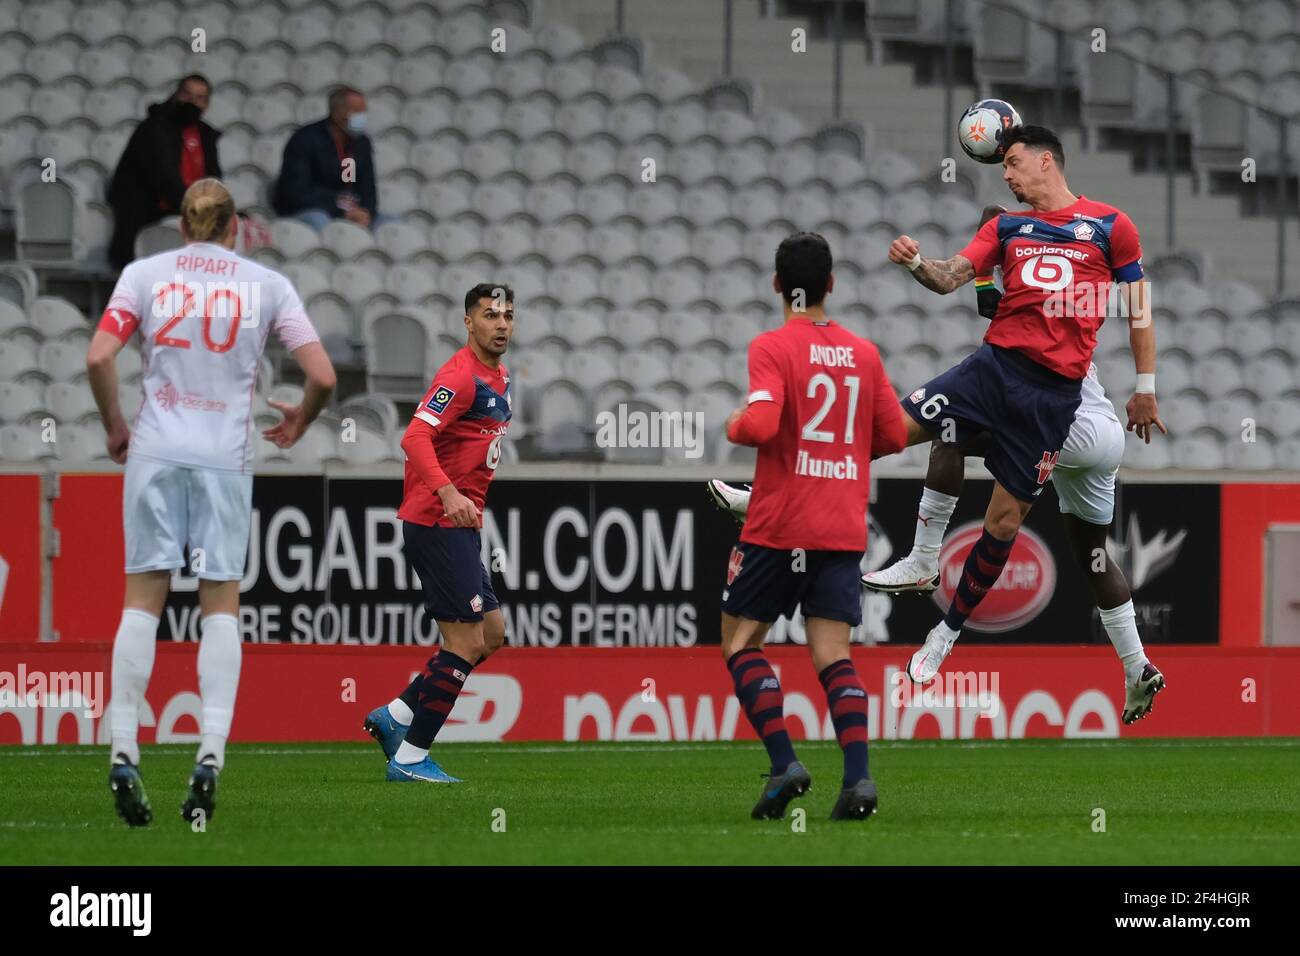 Villeneuve d'Ascq, France. 21st Mar, 2021. Lille Defender JOSE MIGUEL DA ROCHA FONTE in action during the French championship soccer Ligue 1 Uber Eats Lille against Nimes Olympique at Pierre Mauroy Stadium - Villeneuve d'Ascq.Nimes won 2:1 .With this defeat Lille loses first place in the championship to the benefit of Paris Saint Germain Credit: Pierre Stevenin/ZUMA Wire/Alamy Live News Stock Photo